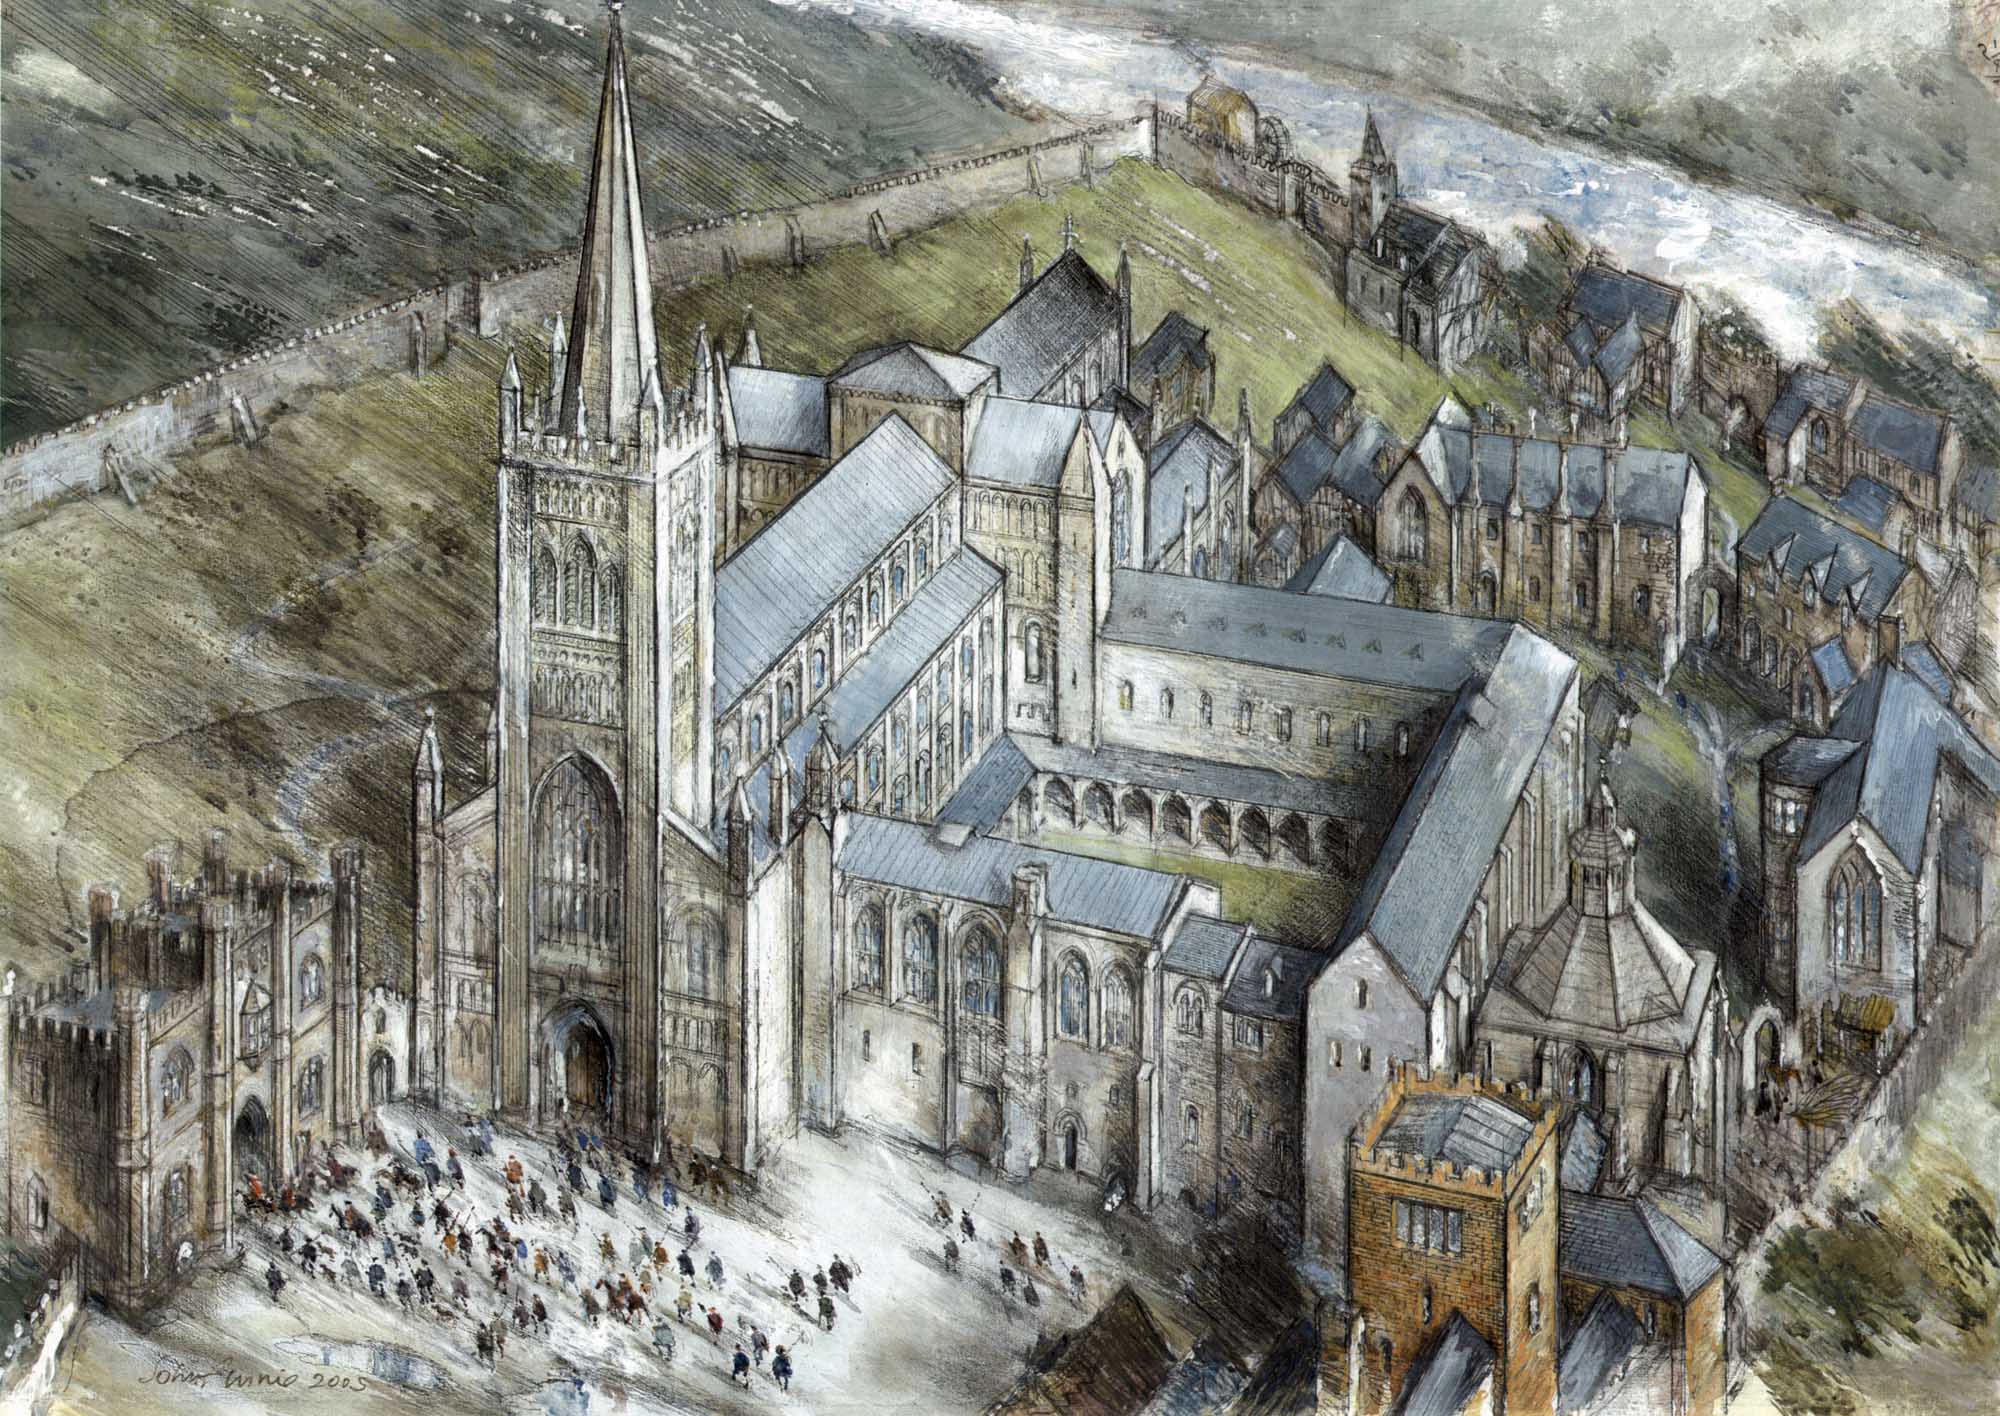 A artist impression of Leicester Abbey in its heyday - John Finnie